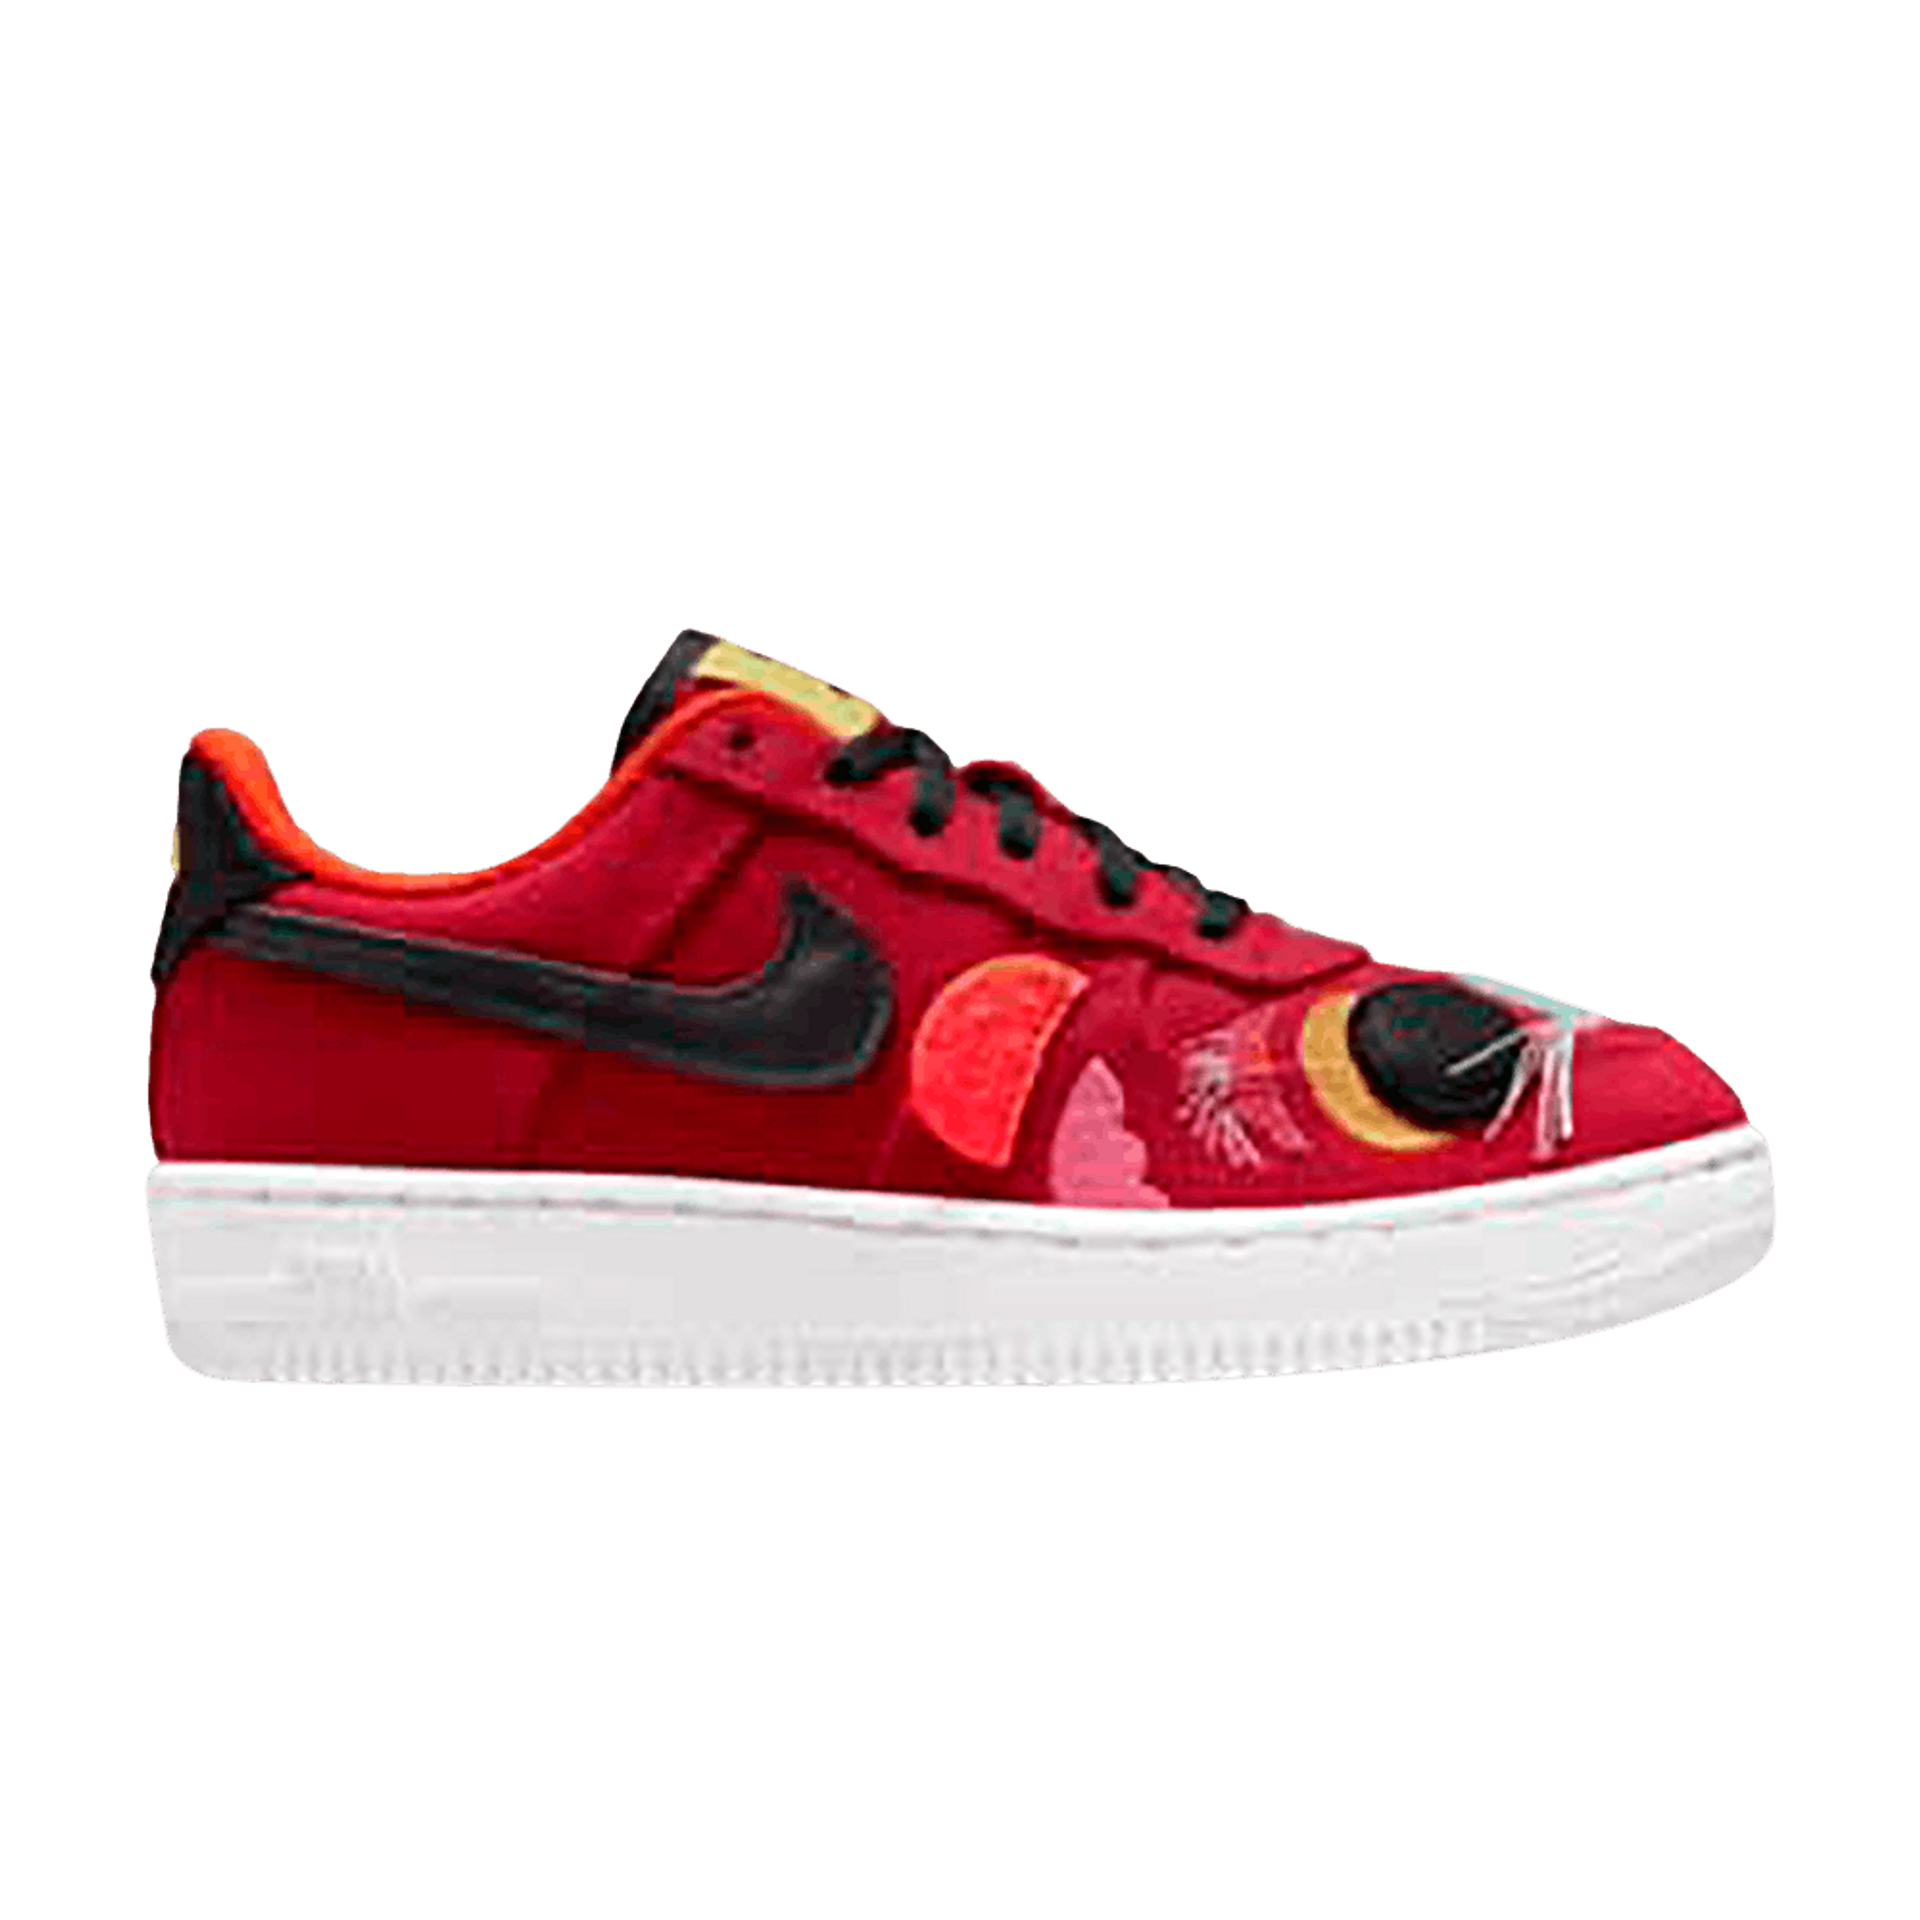 Force 1 LV8 PS 'Chinese New Year'